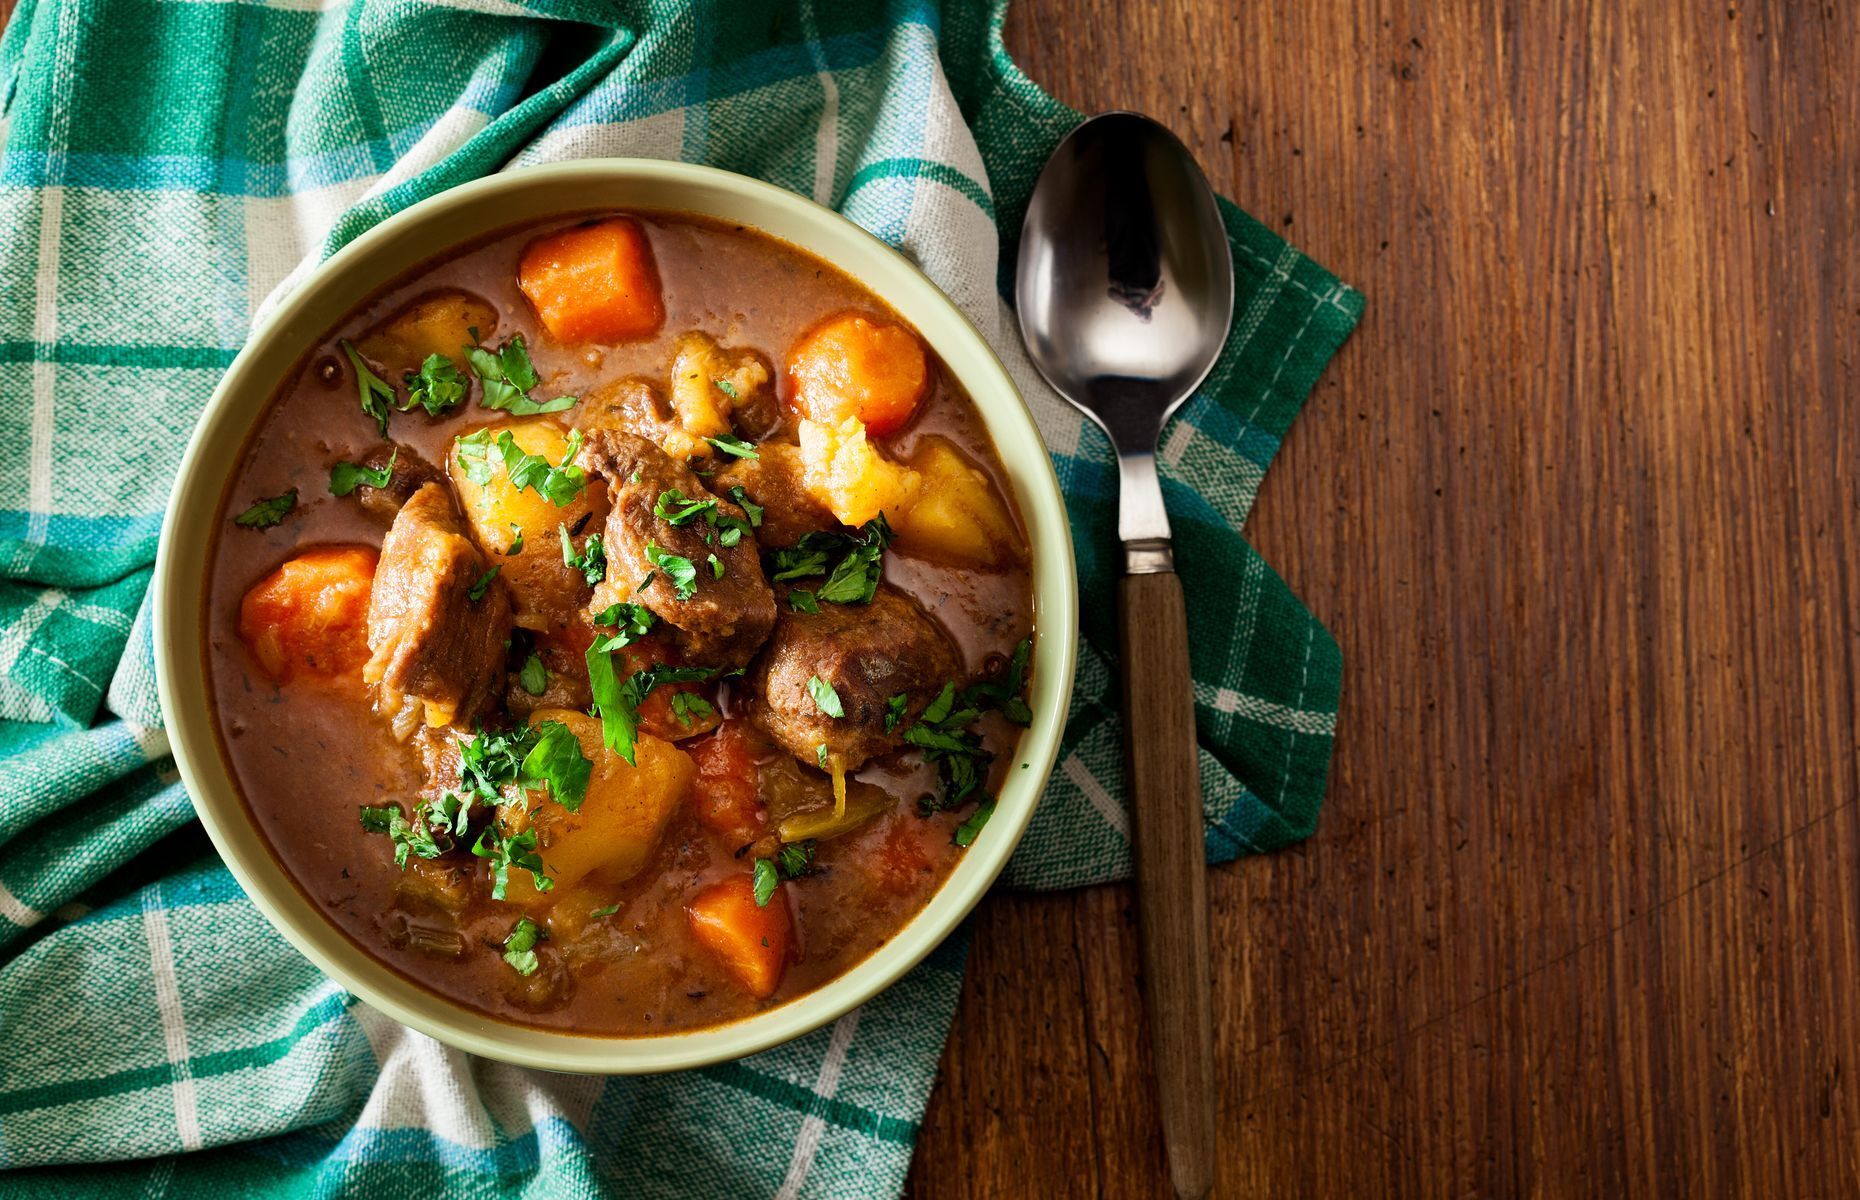 <p>If there’s one dish you absolutely must try on your trip to Ireland, it’s a traditional <a href="https://theculturetrip.com/europe/ireland/articles/a-brief-history-of-traditional-irish-stew/" rel="noreferrer noopener">Irish stew</a>. While everyone has their own recipe, it’s usually made with potatoes, onions, and mutton or lamb that’s slow-cooked until the meat is tender. In addition to the basics, some variations include carrots, barley, broth, and thyme.</p>